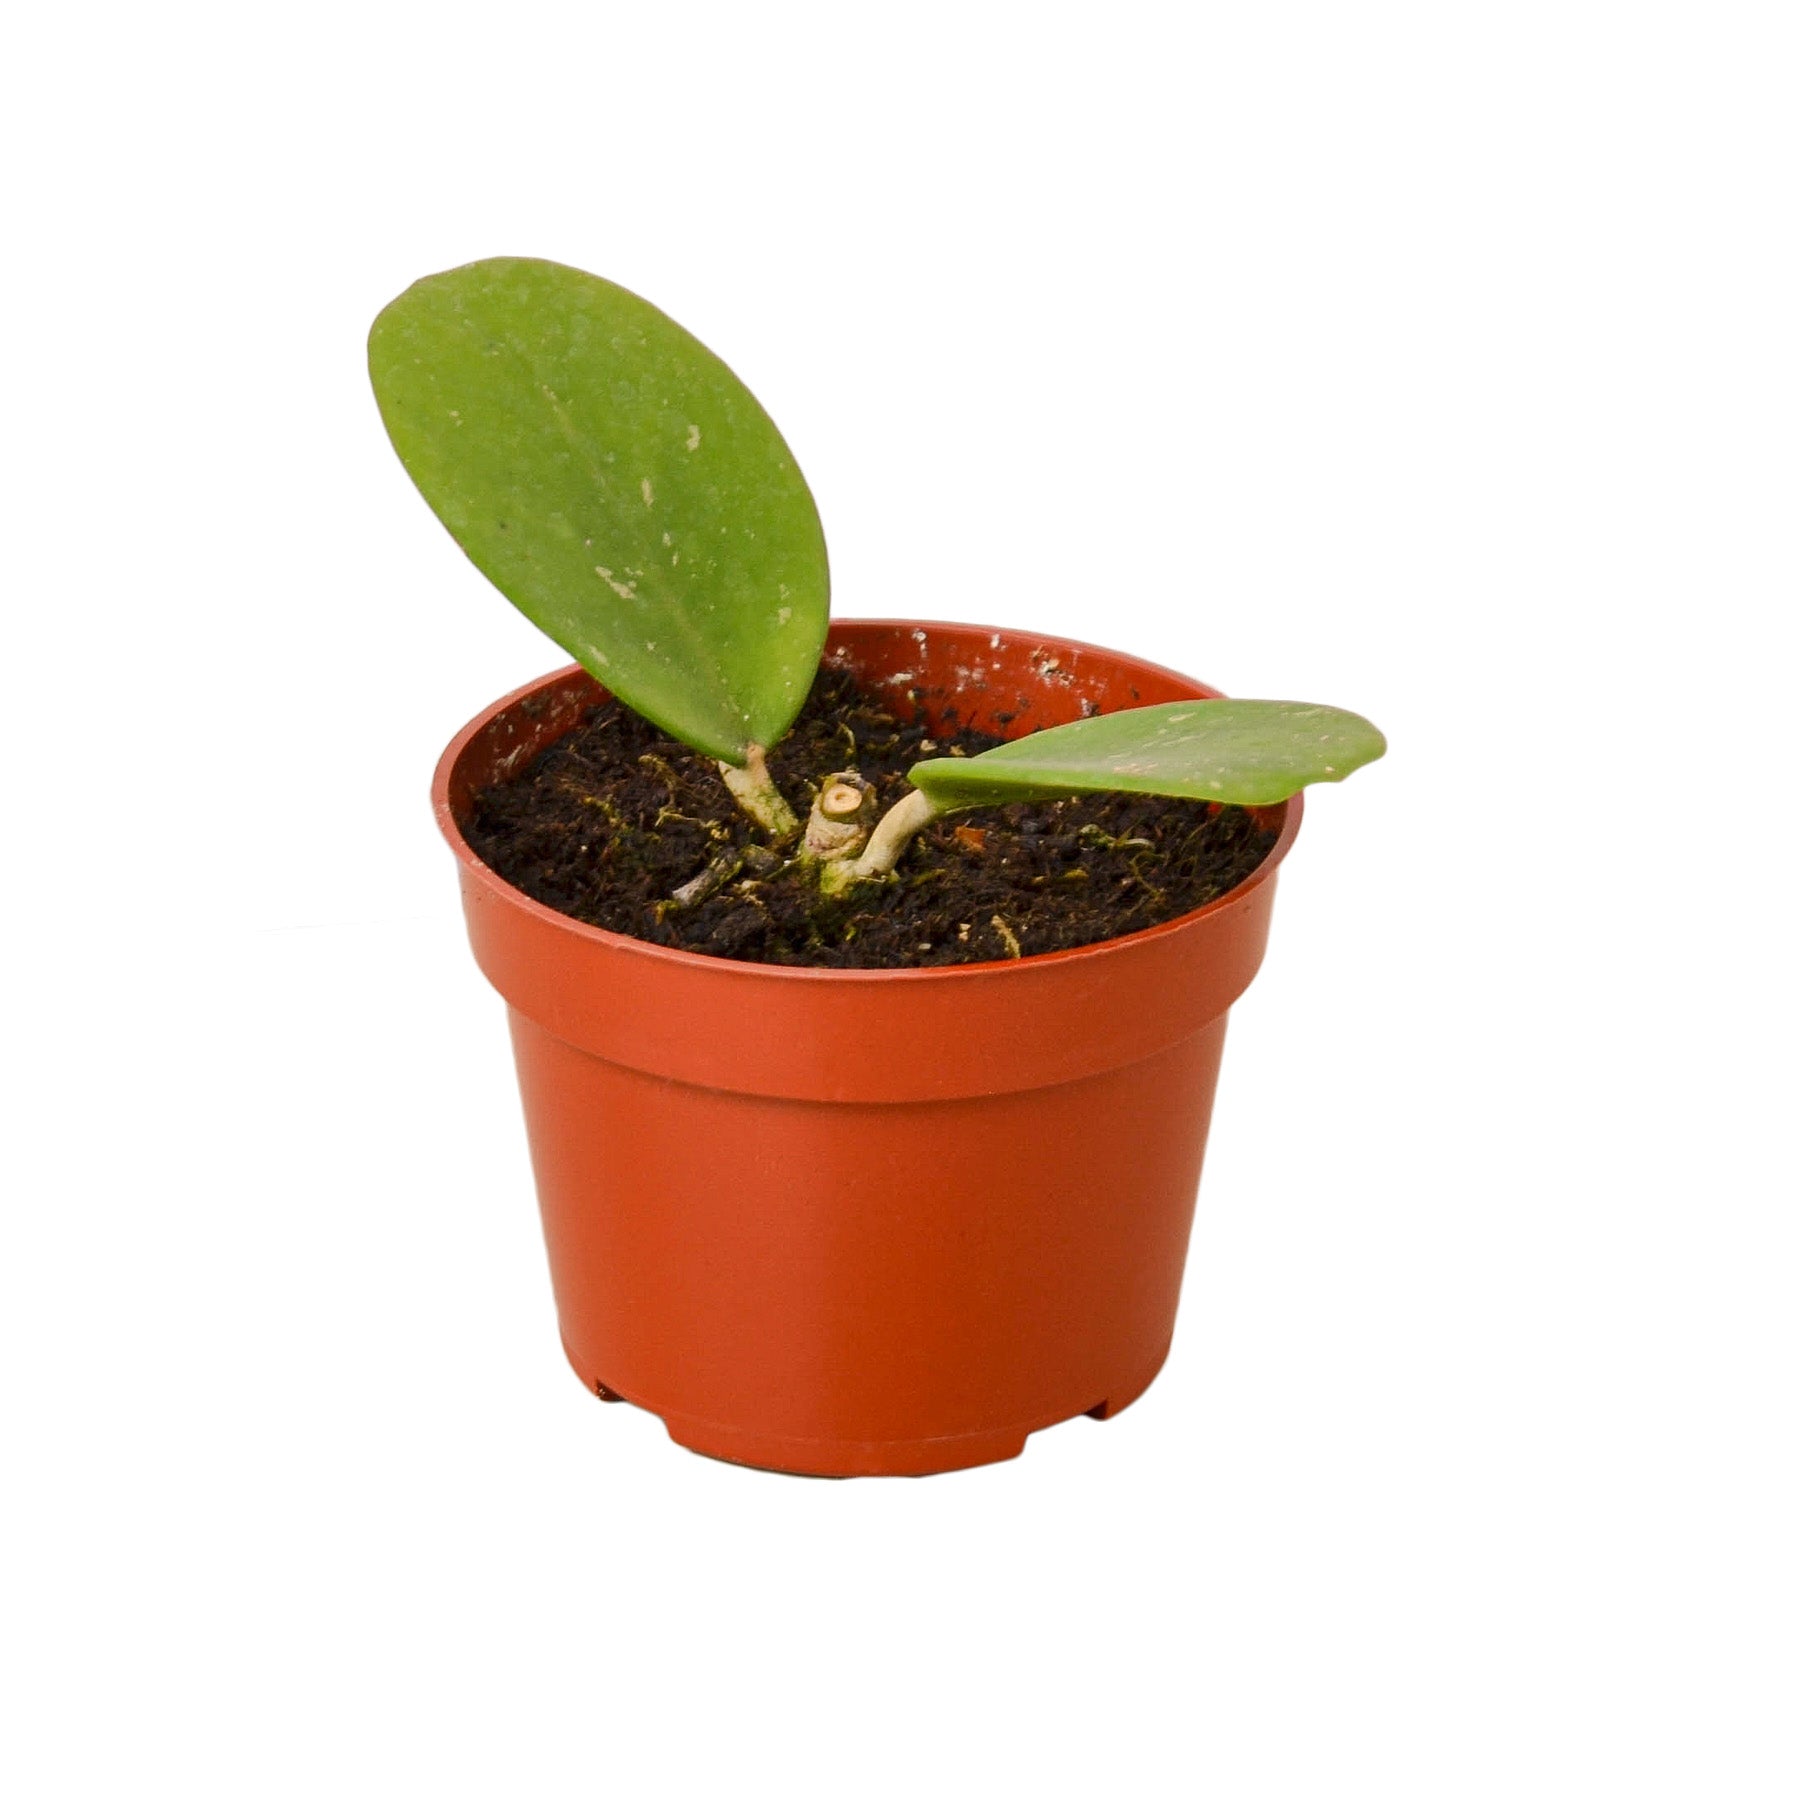 A small plant in a red pot on a white background, purchased from one of the top plant nurseries near me.